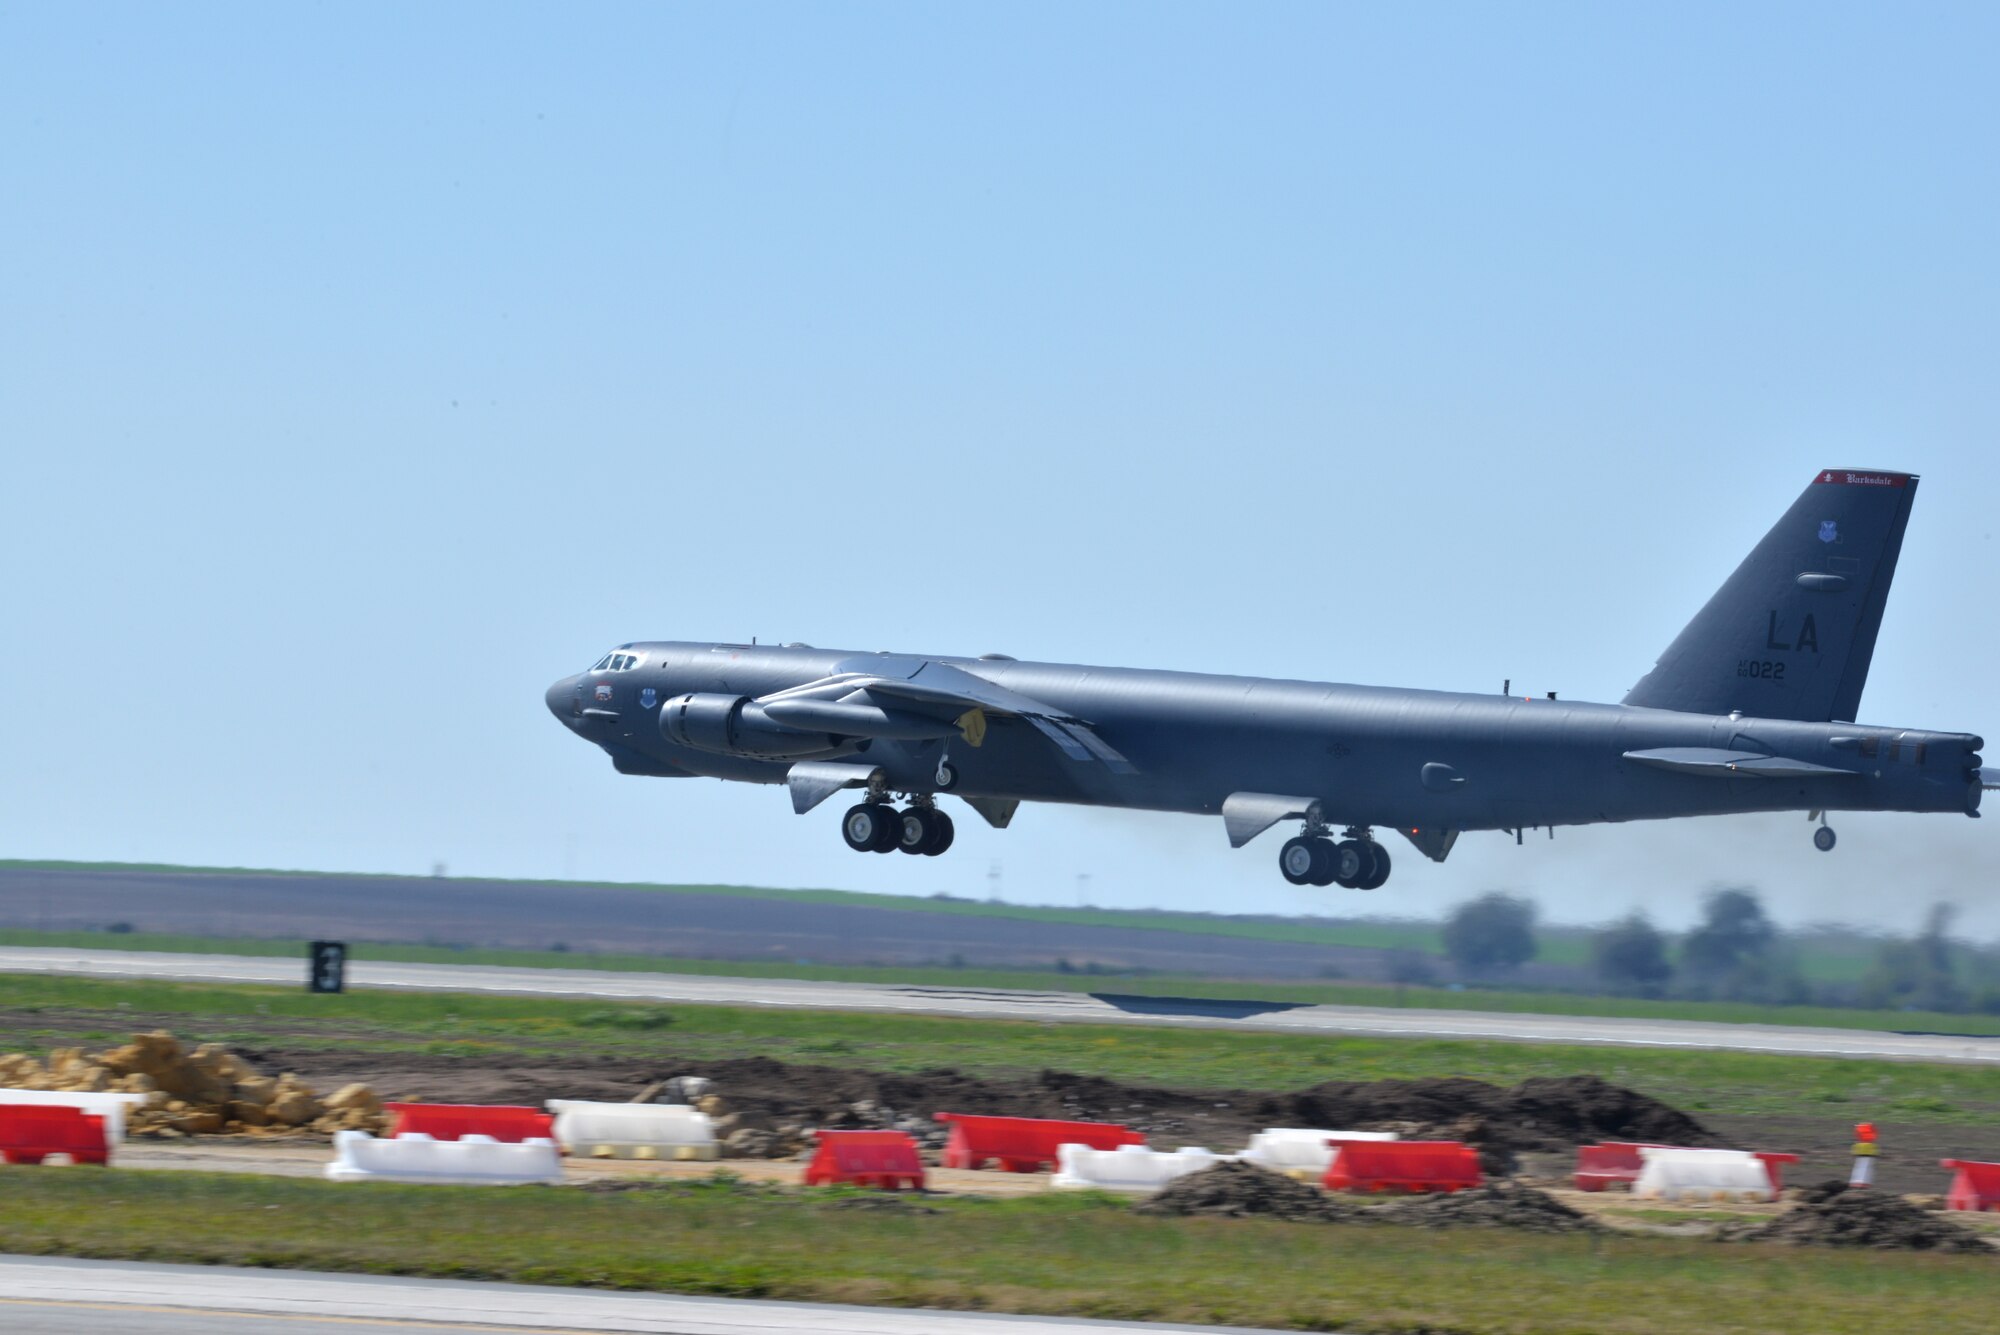 A B-52 Stratofortress takes off from Morón Air Base, Spain, during a joint-defense air counter tactics exercise with the Spanish Air Force, Feb. 29, 2016. Integrated exercises like these sustain and strengthen operational and coordination capabilities between allied militaries, reinforcing collective defense capabilities with partner nations in strategic regions. (U.S. Air Force photo/Senior Airman Joseph Raatz)